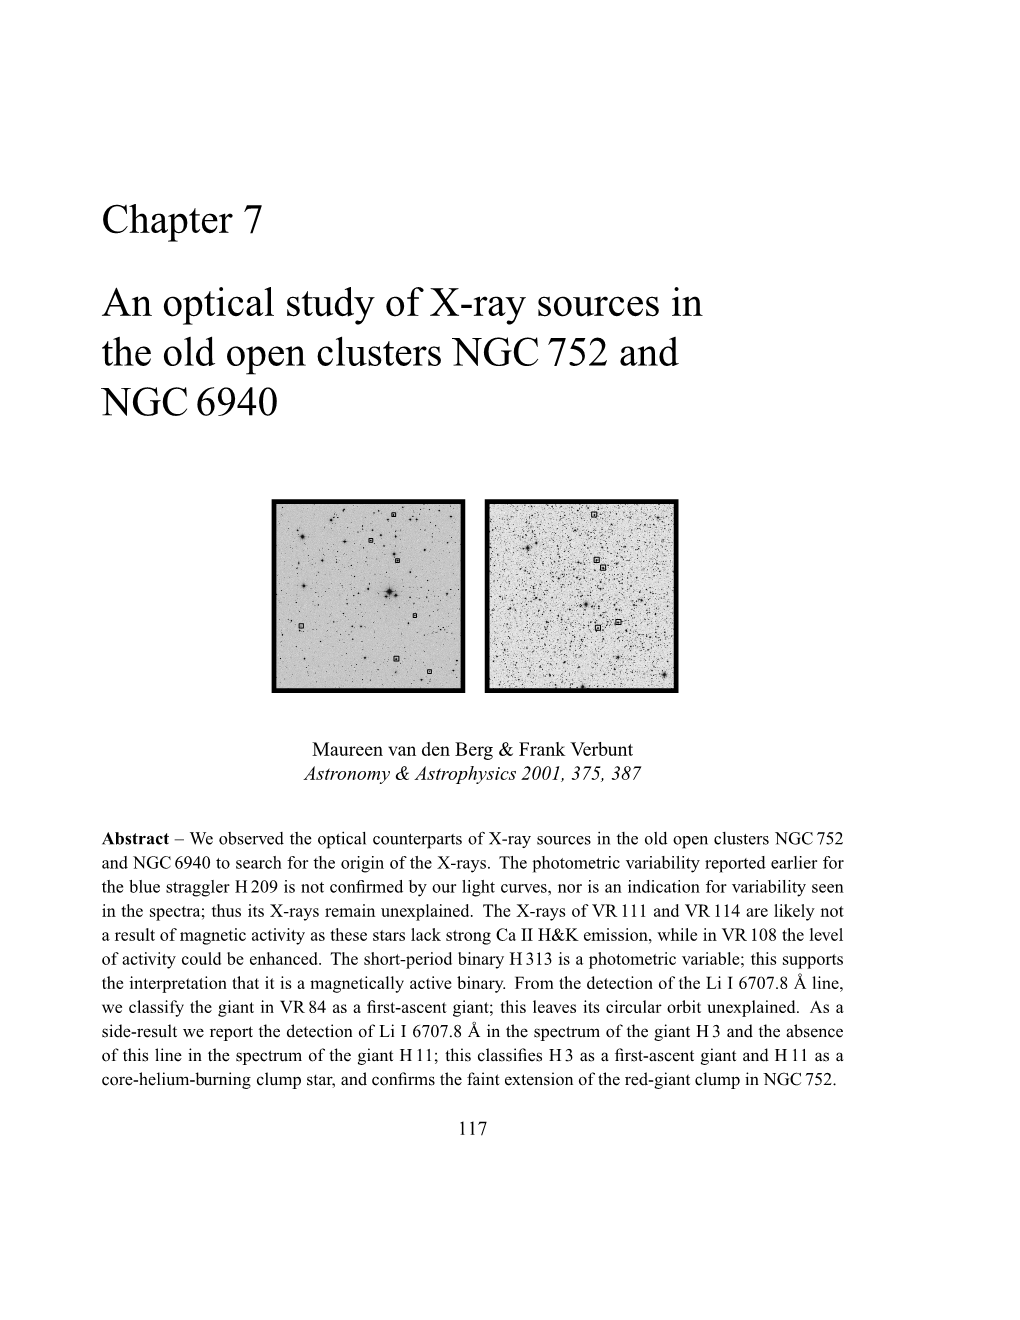 Chapter 7 an Optical Study of X-Ray Sources in the Old Open Clusters